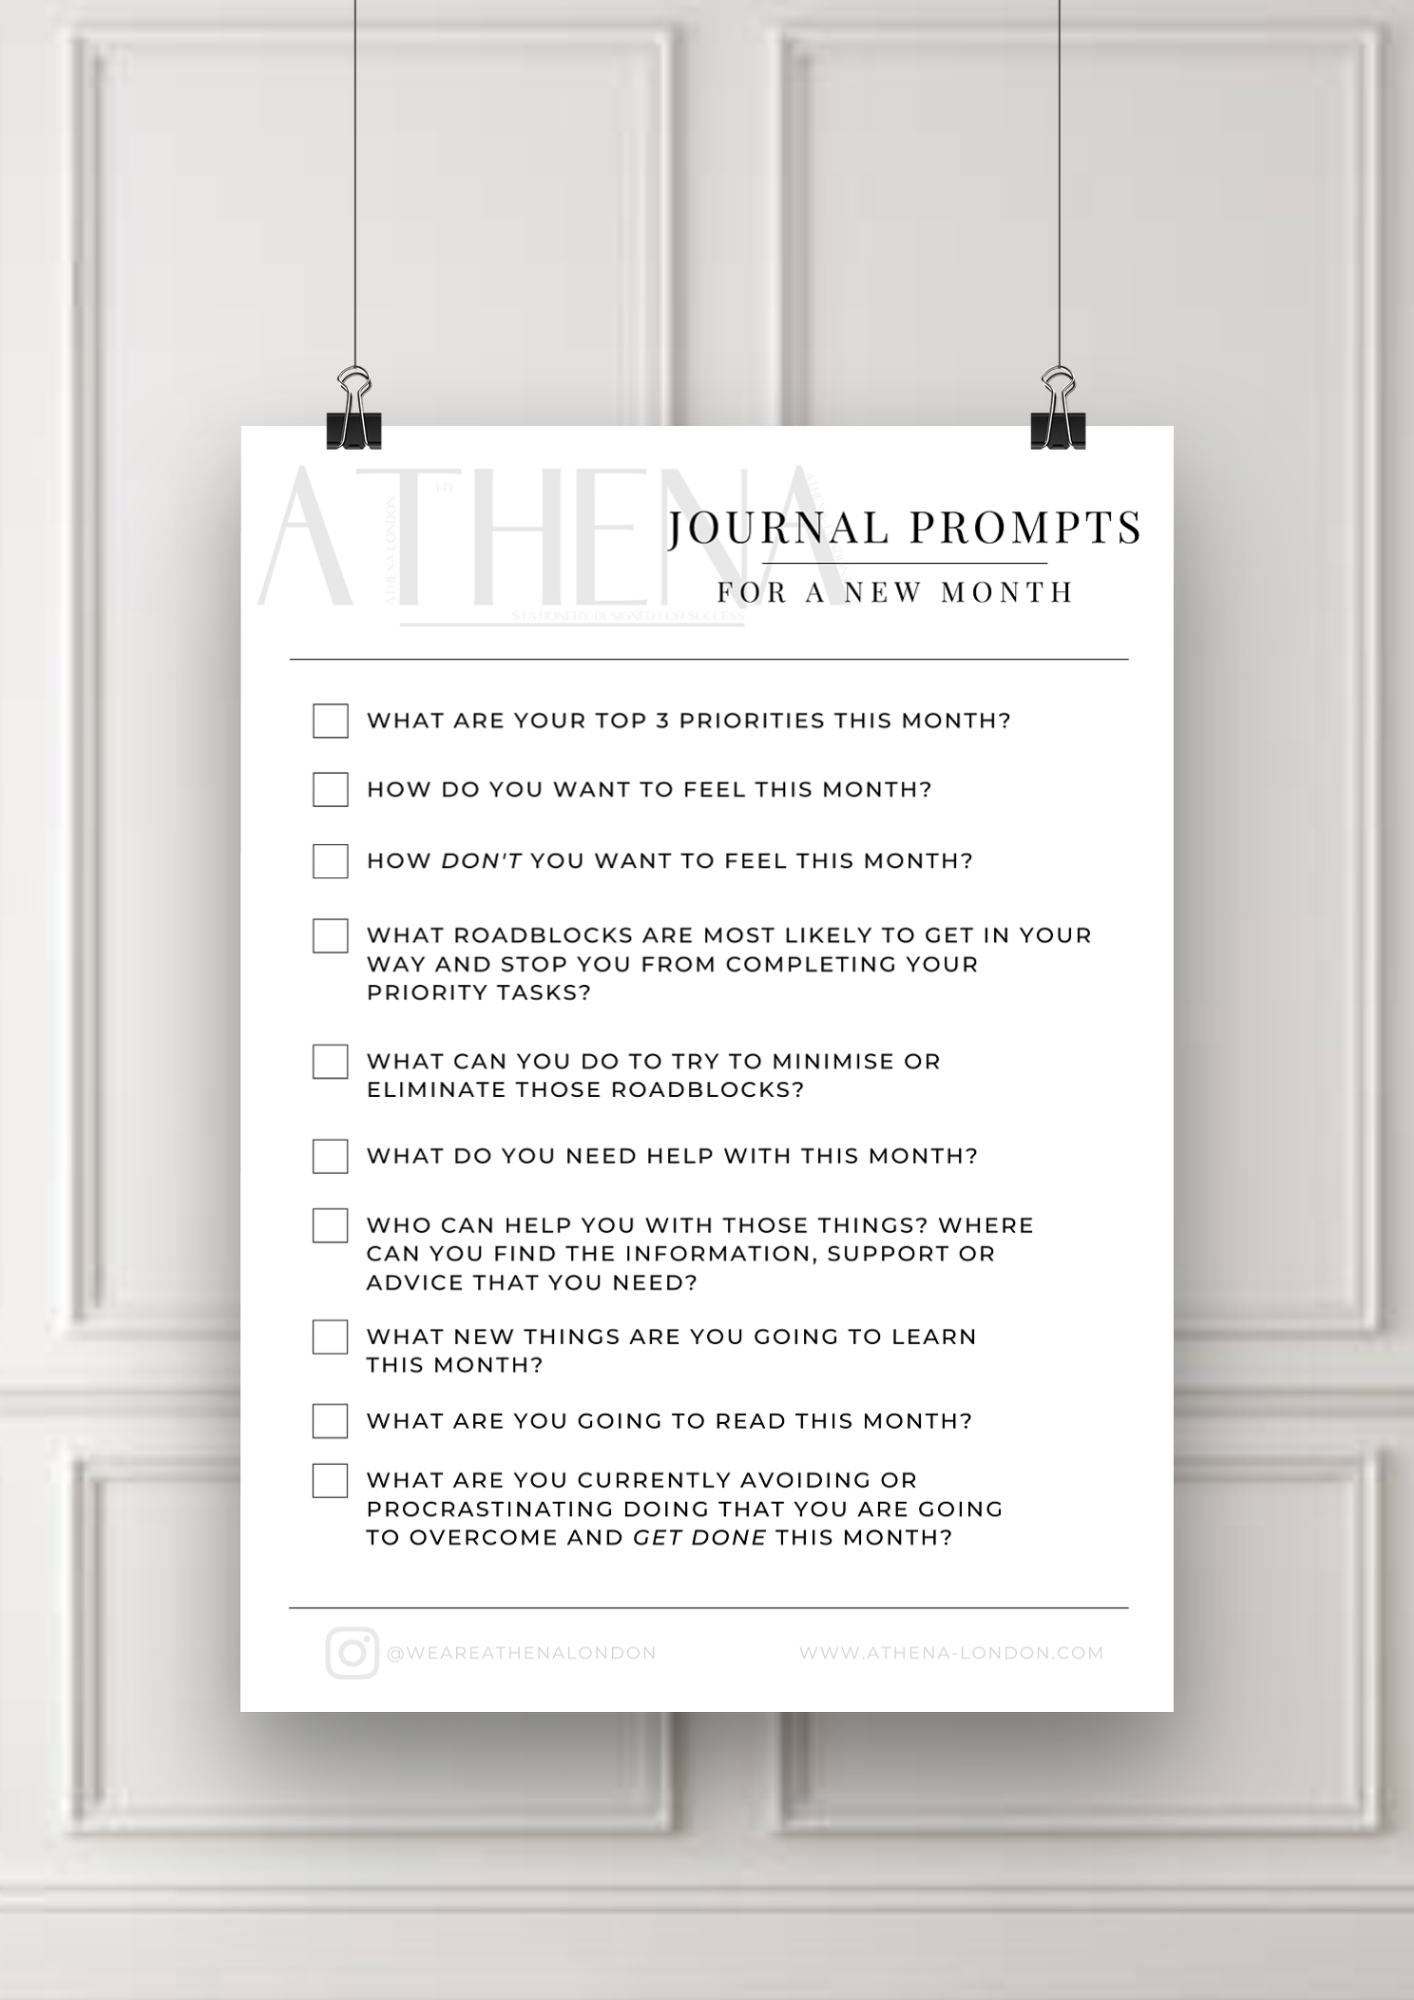 10 Journal Prompts For A New Month